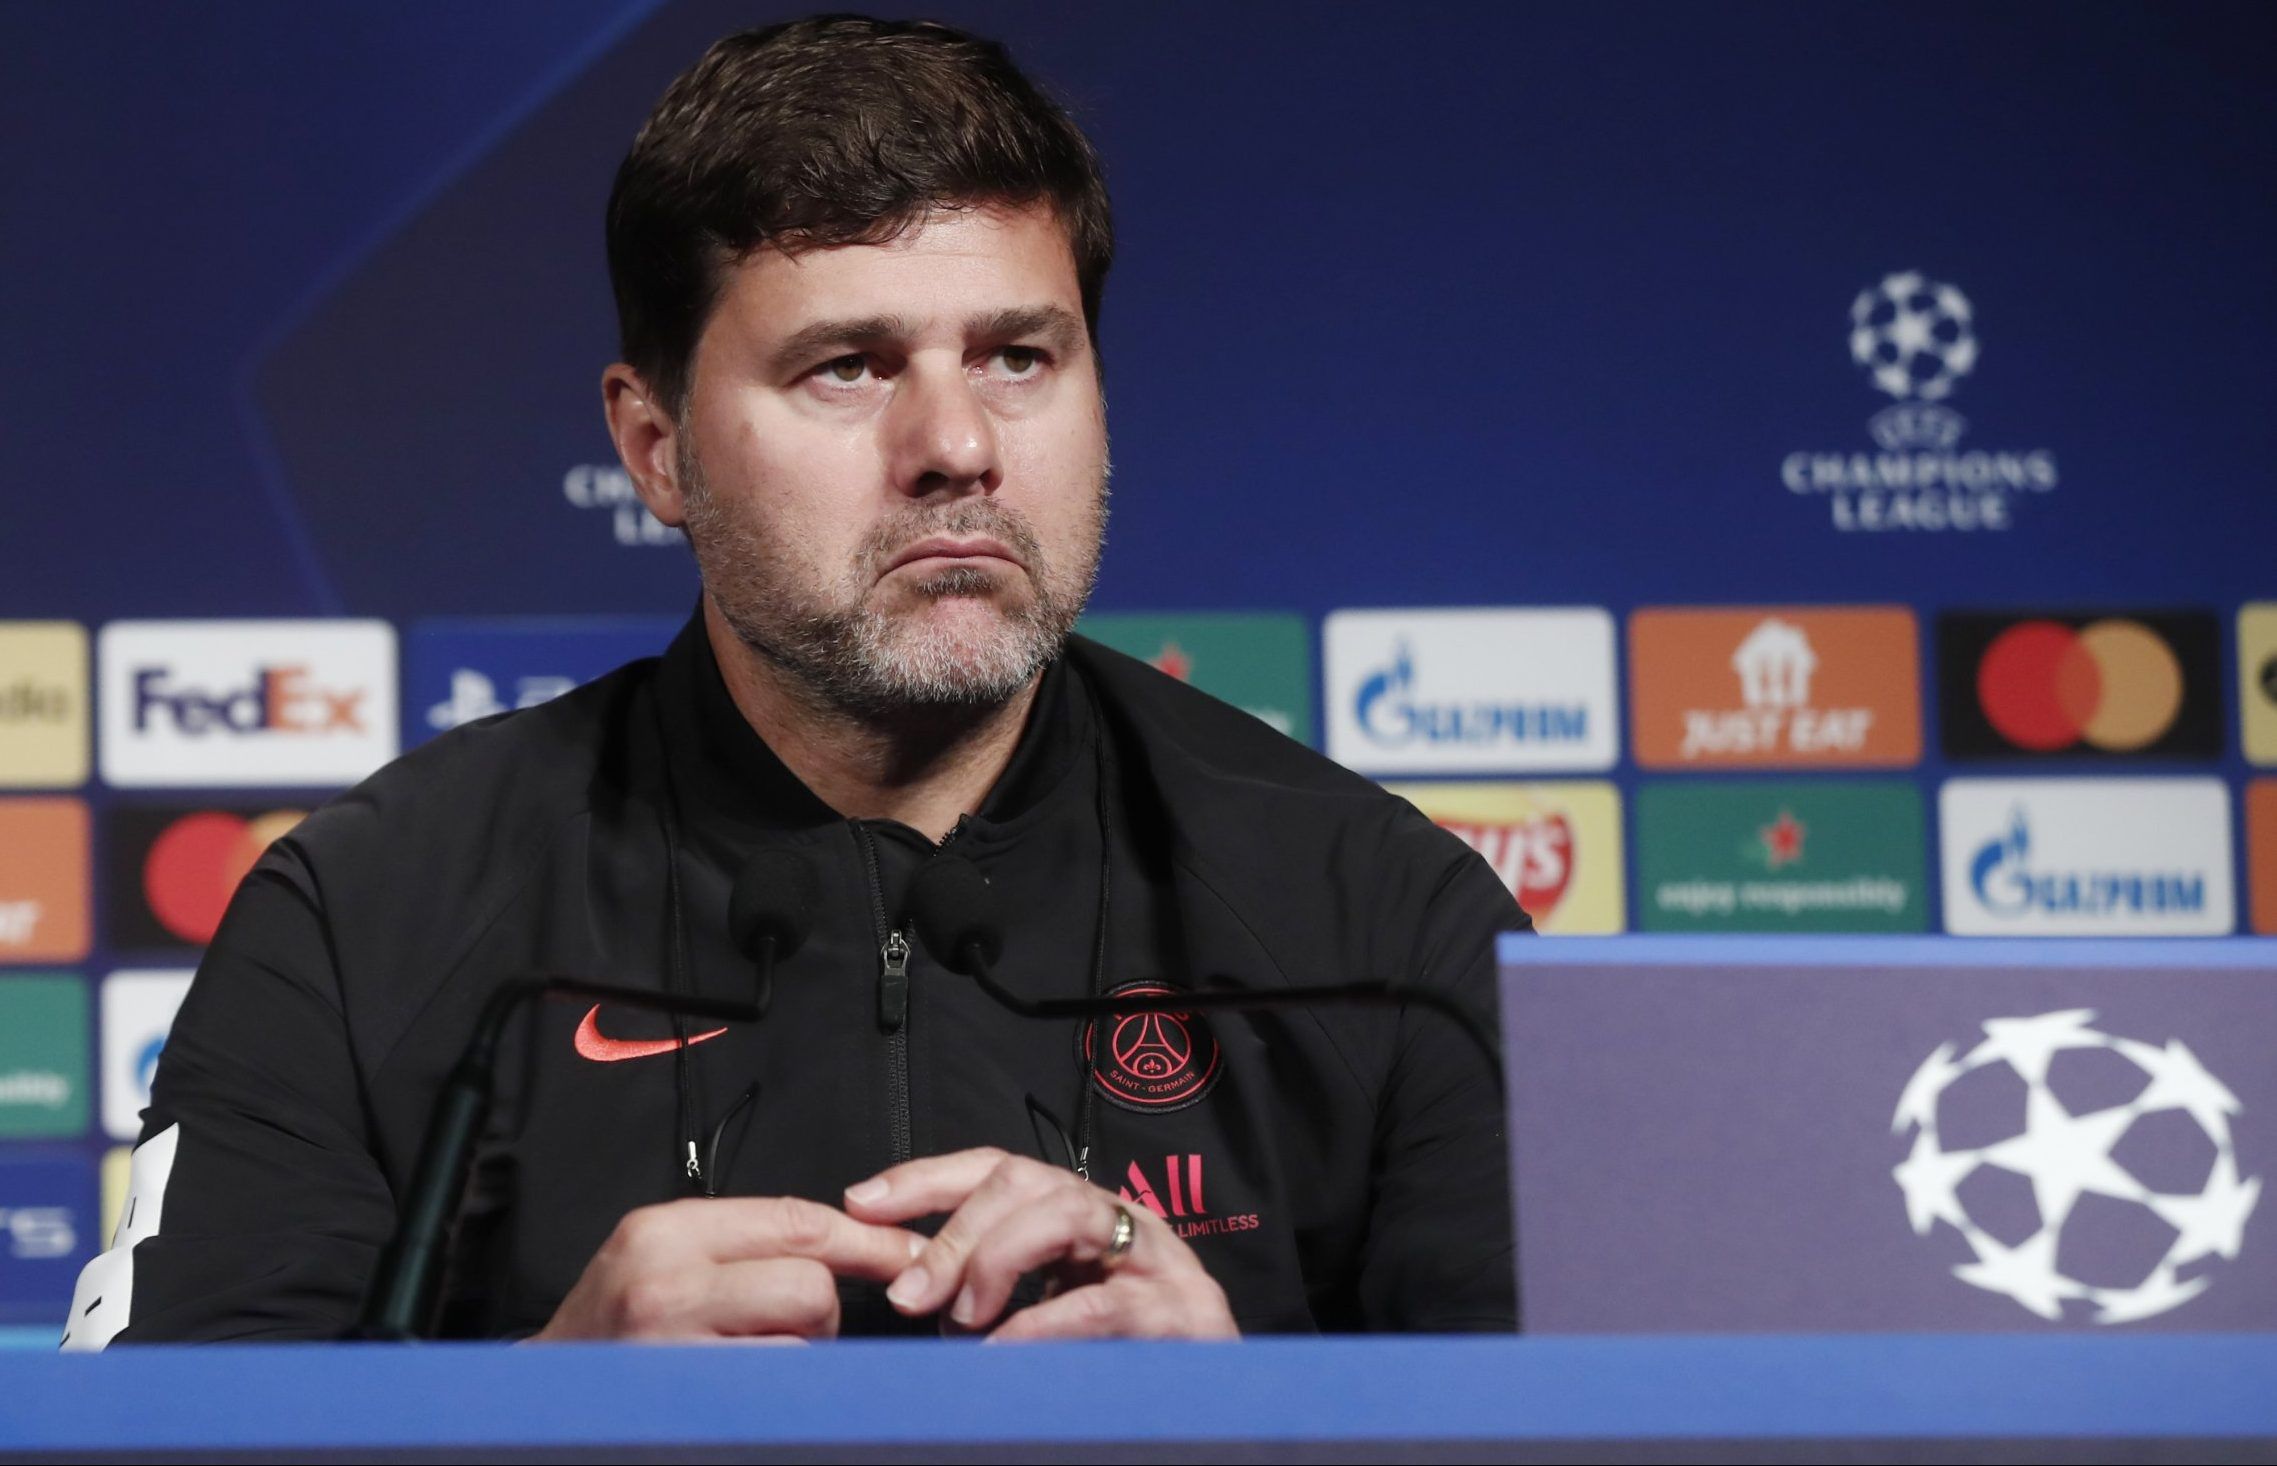 PSG manager Mauricio Pochettino looks on during press conference